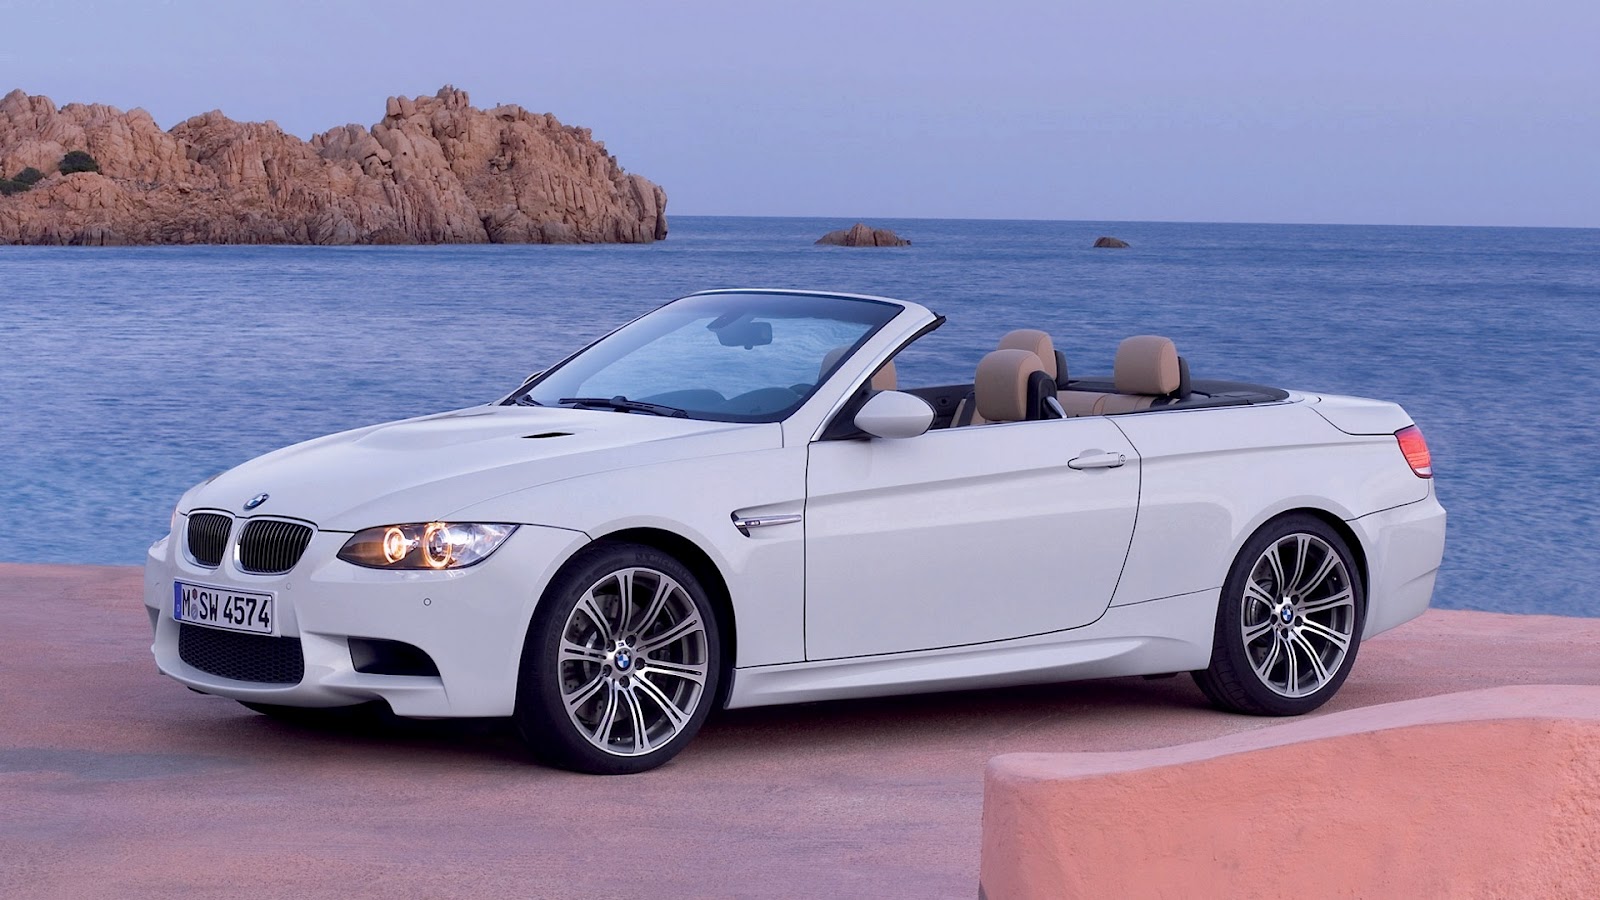 Hd Wallpapers Bmw Cars